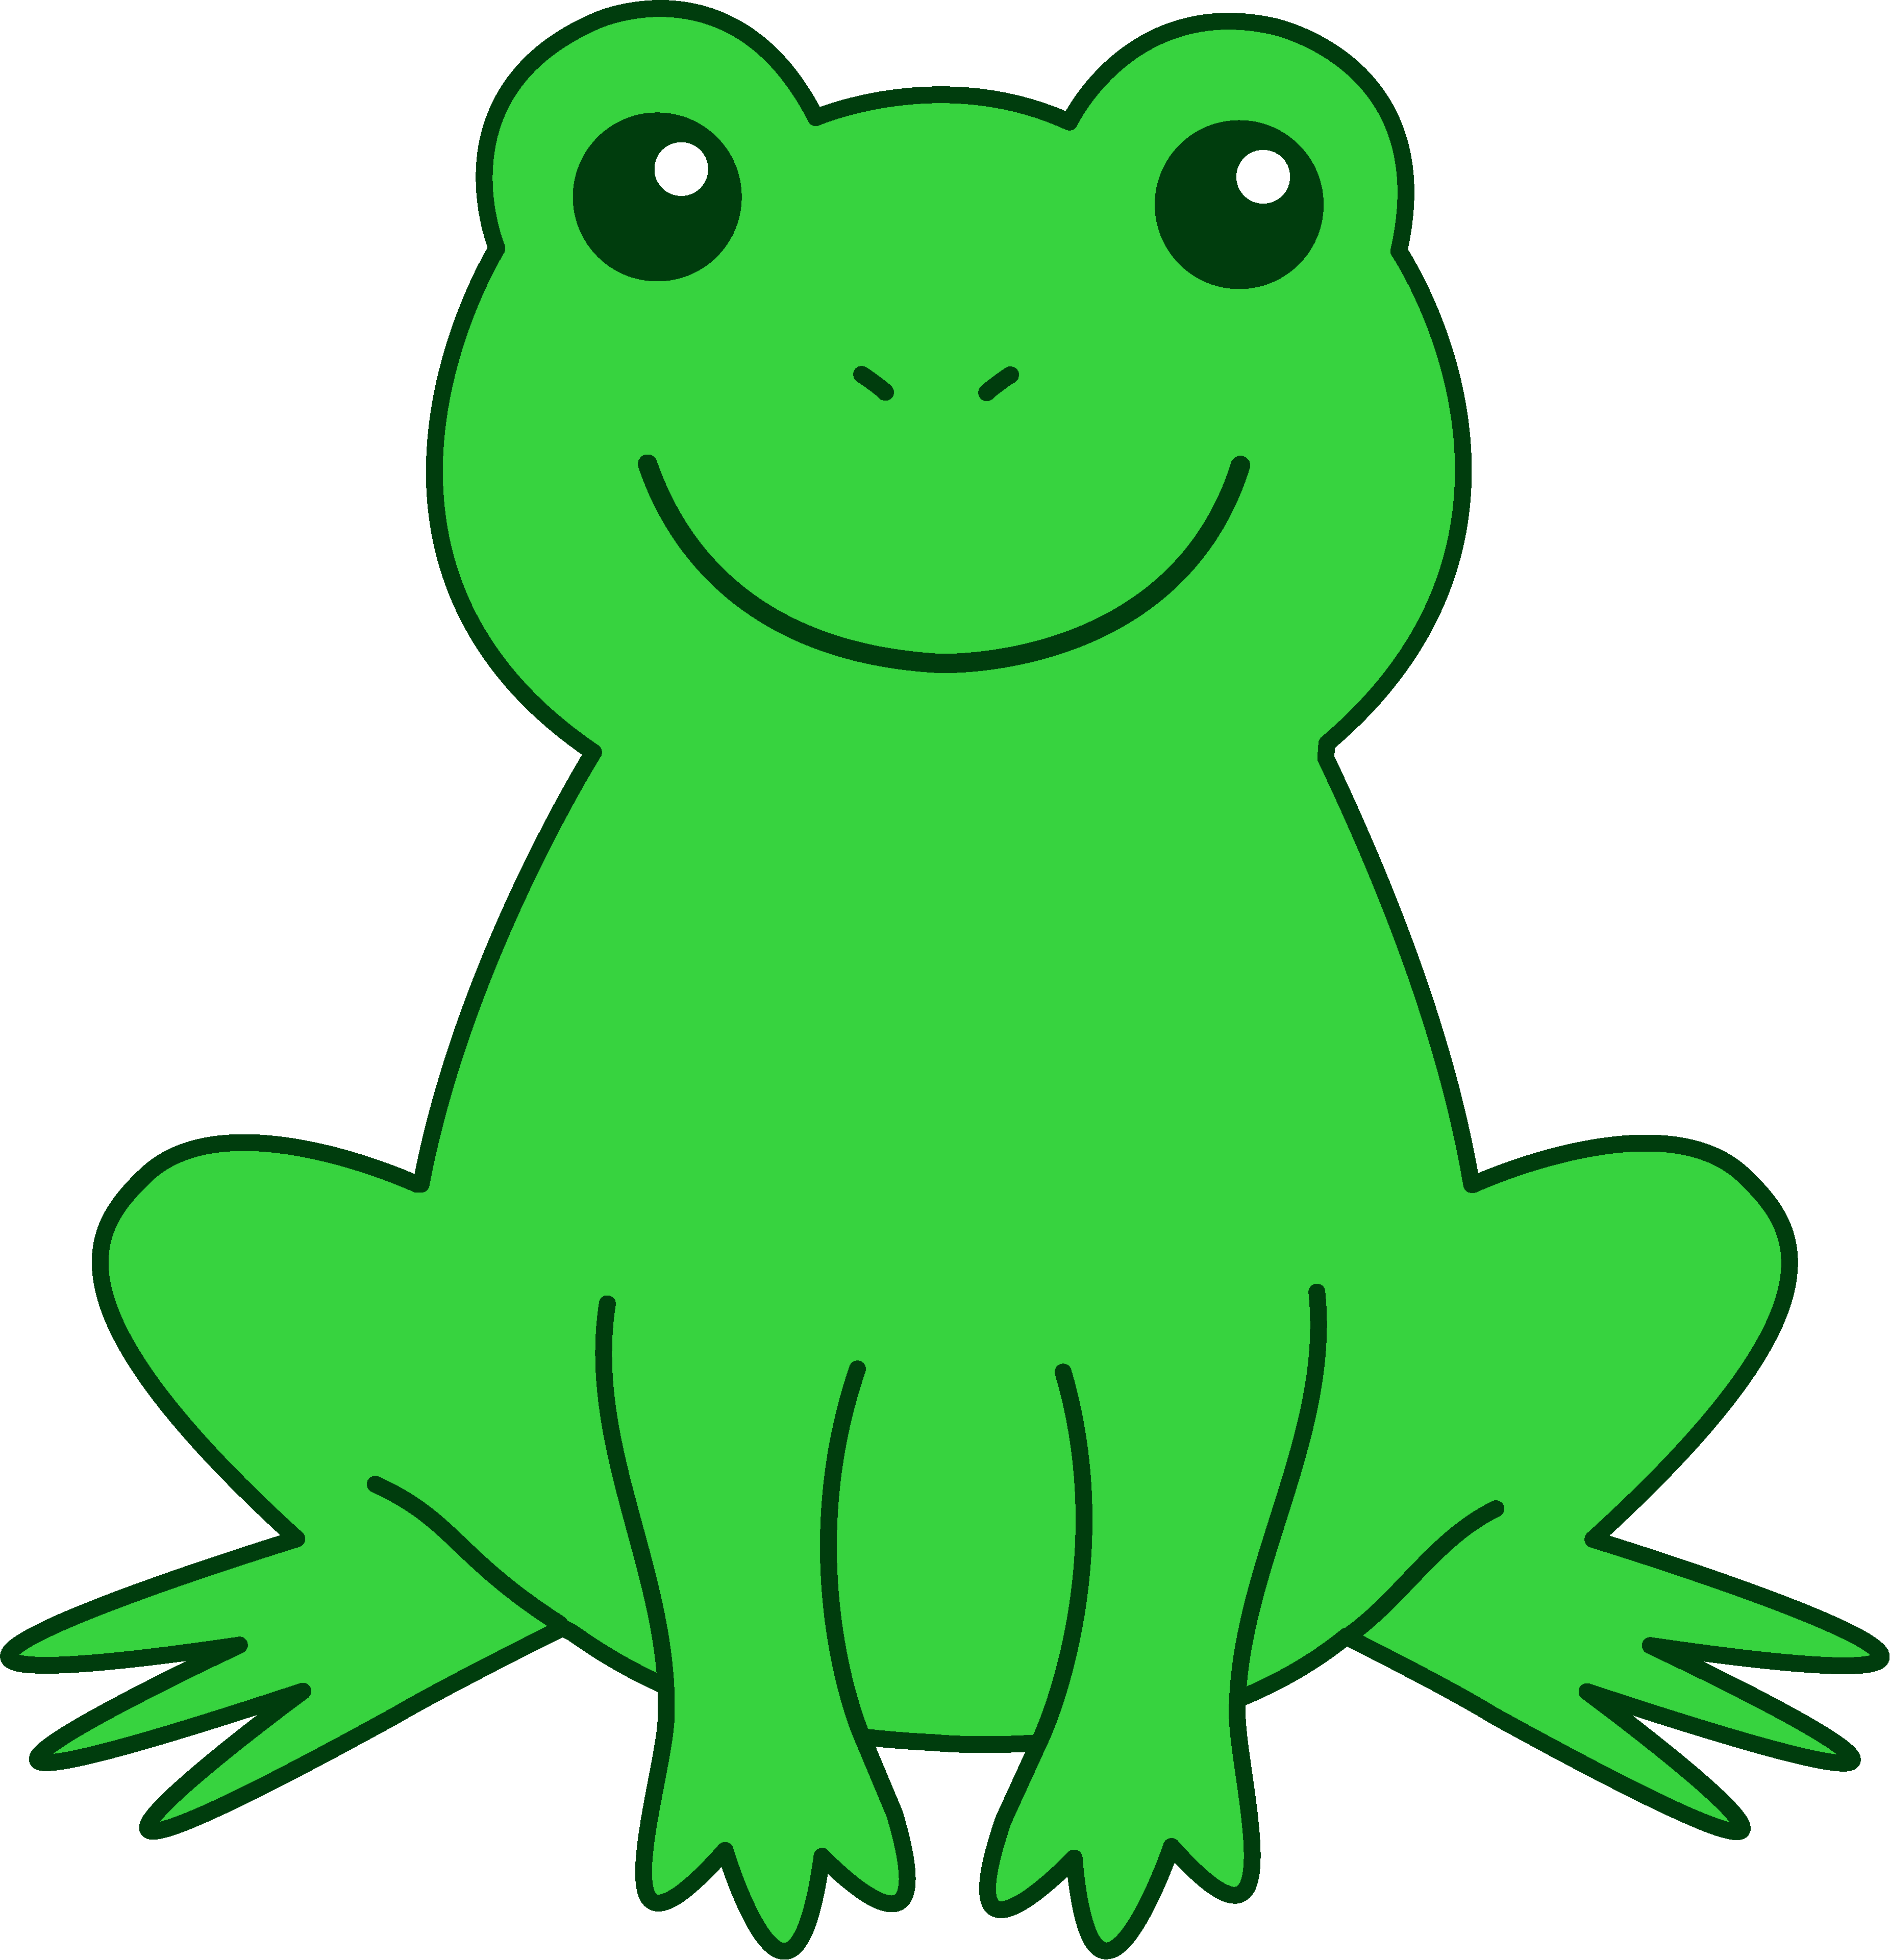 Hopping Frog Clipart | Clipart Panda - Free Clipart Images